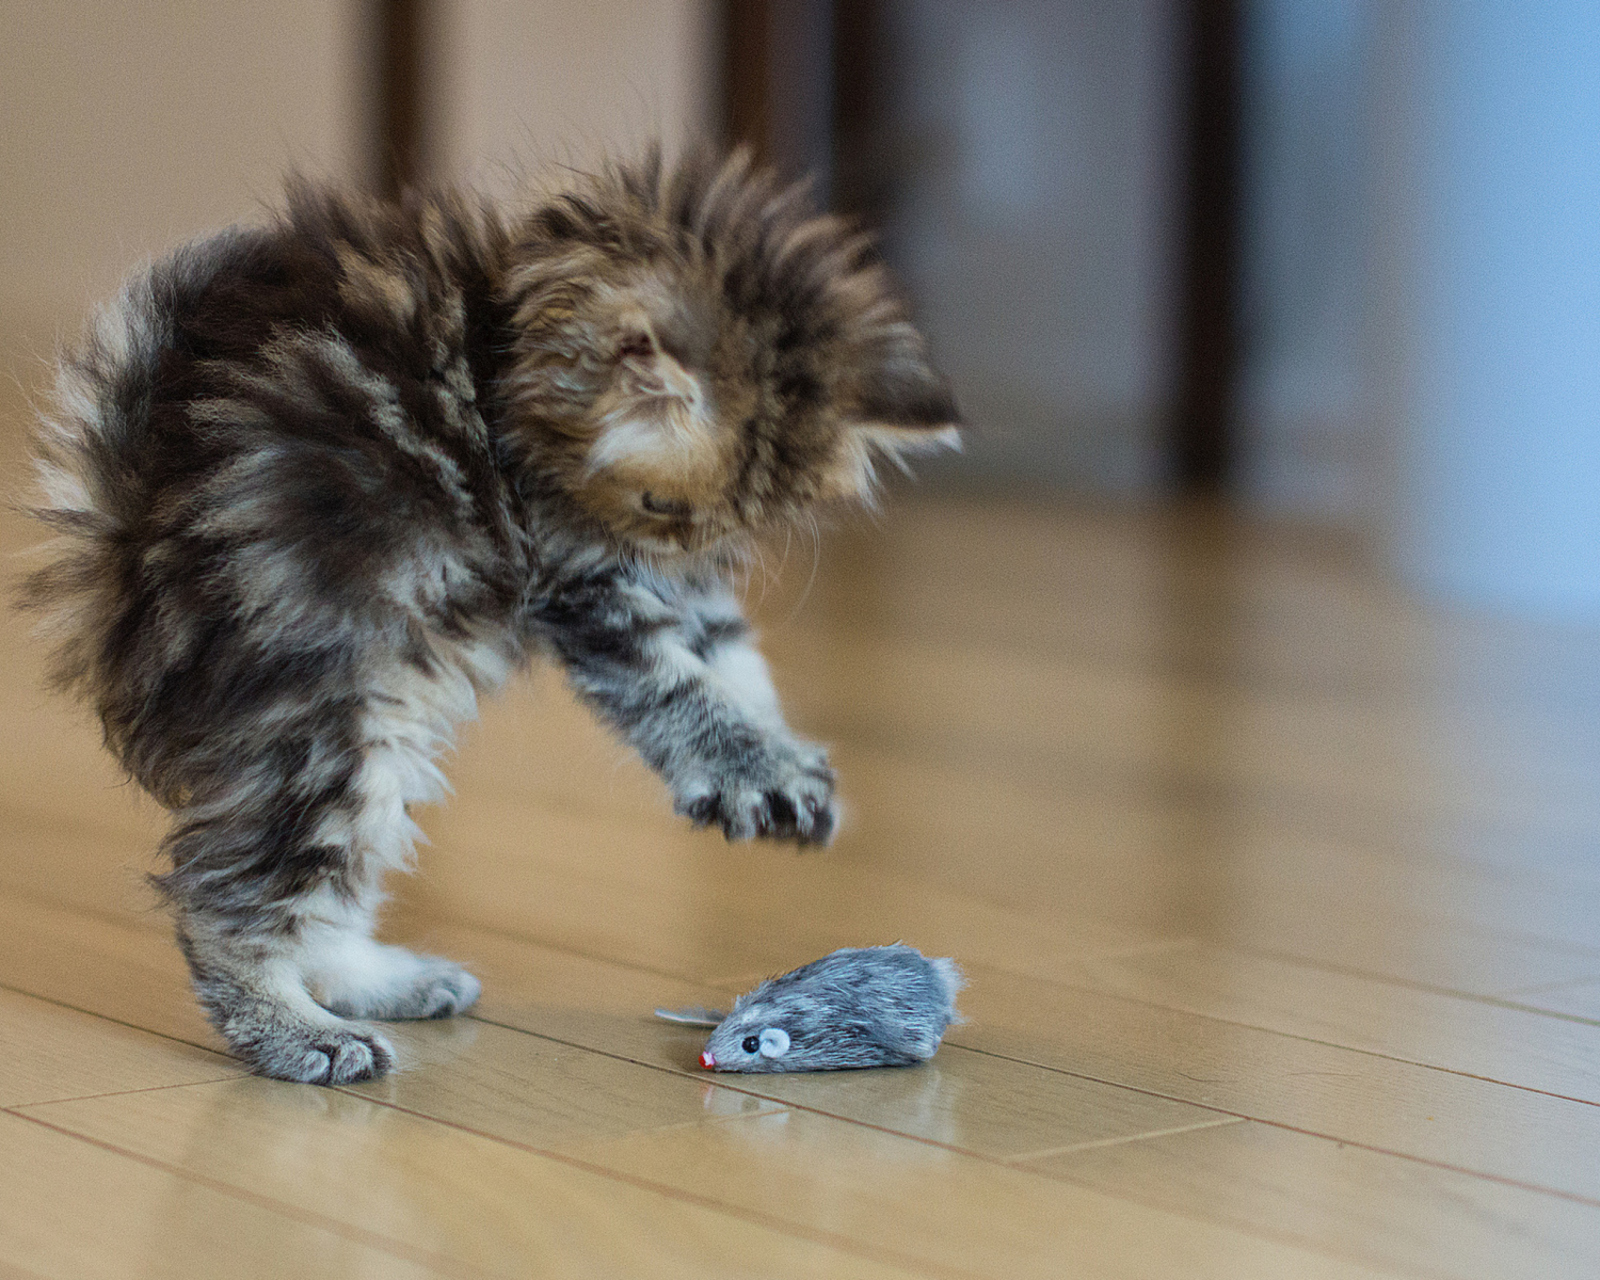 Funny Kitten Playing With Toy Mouse wallpaper 1600x1280